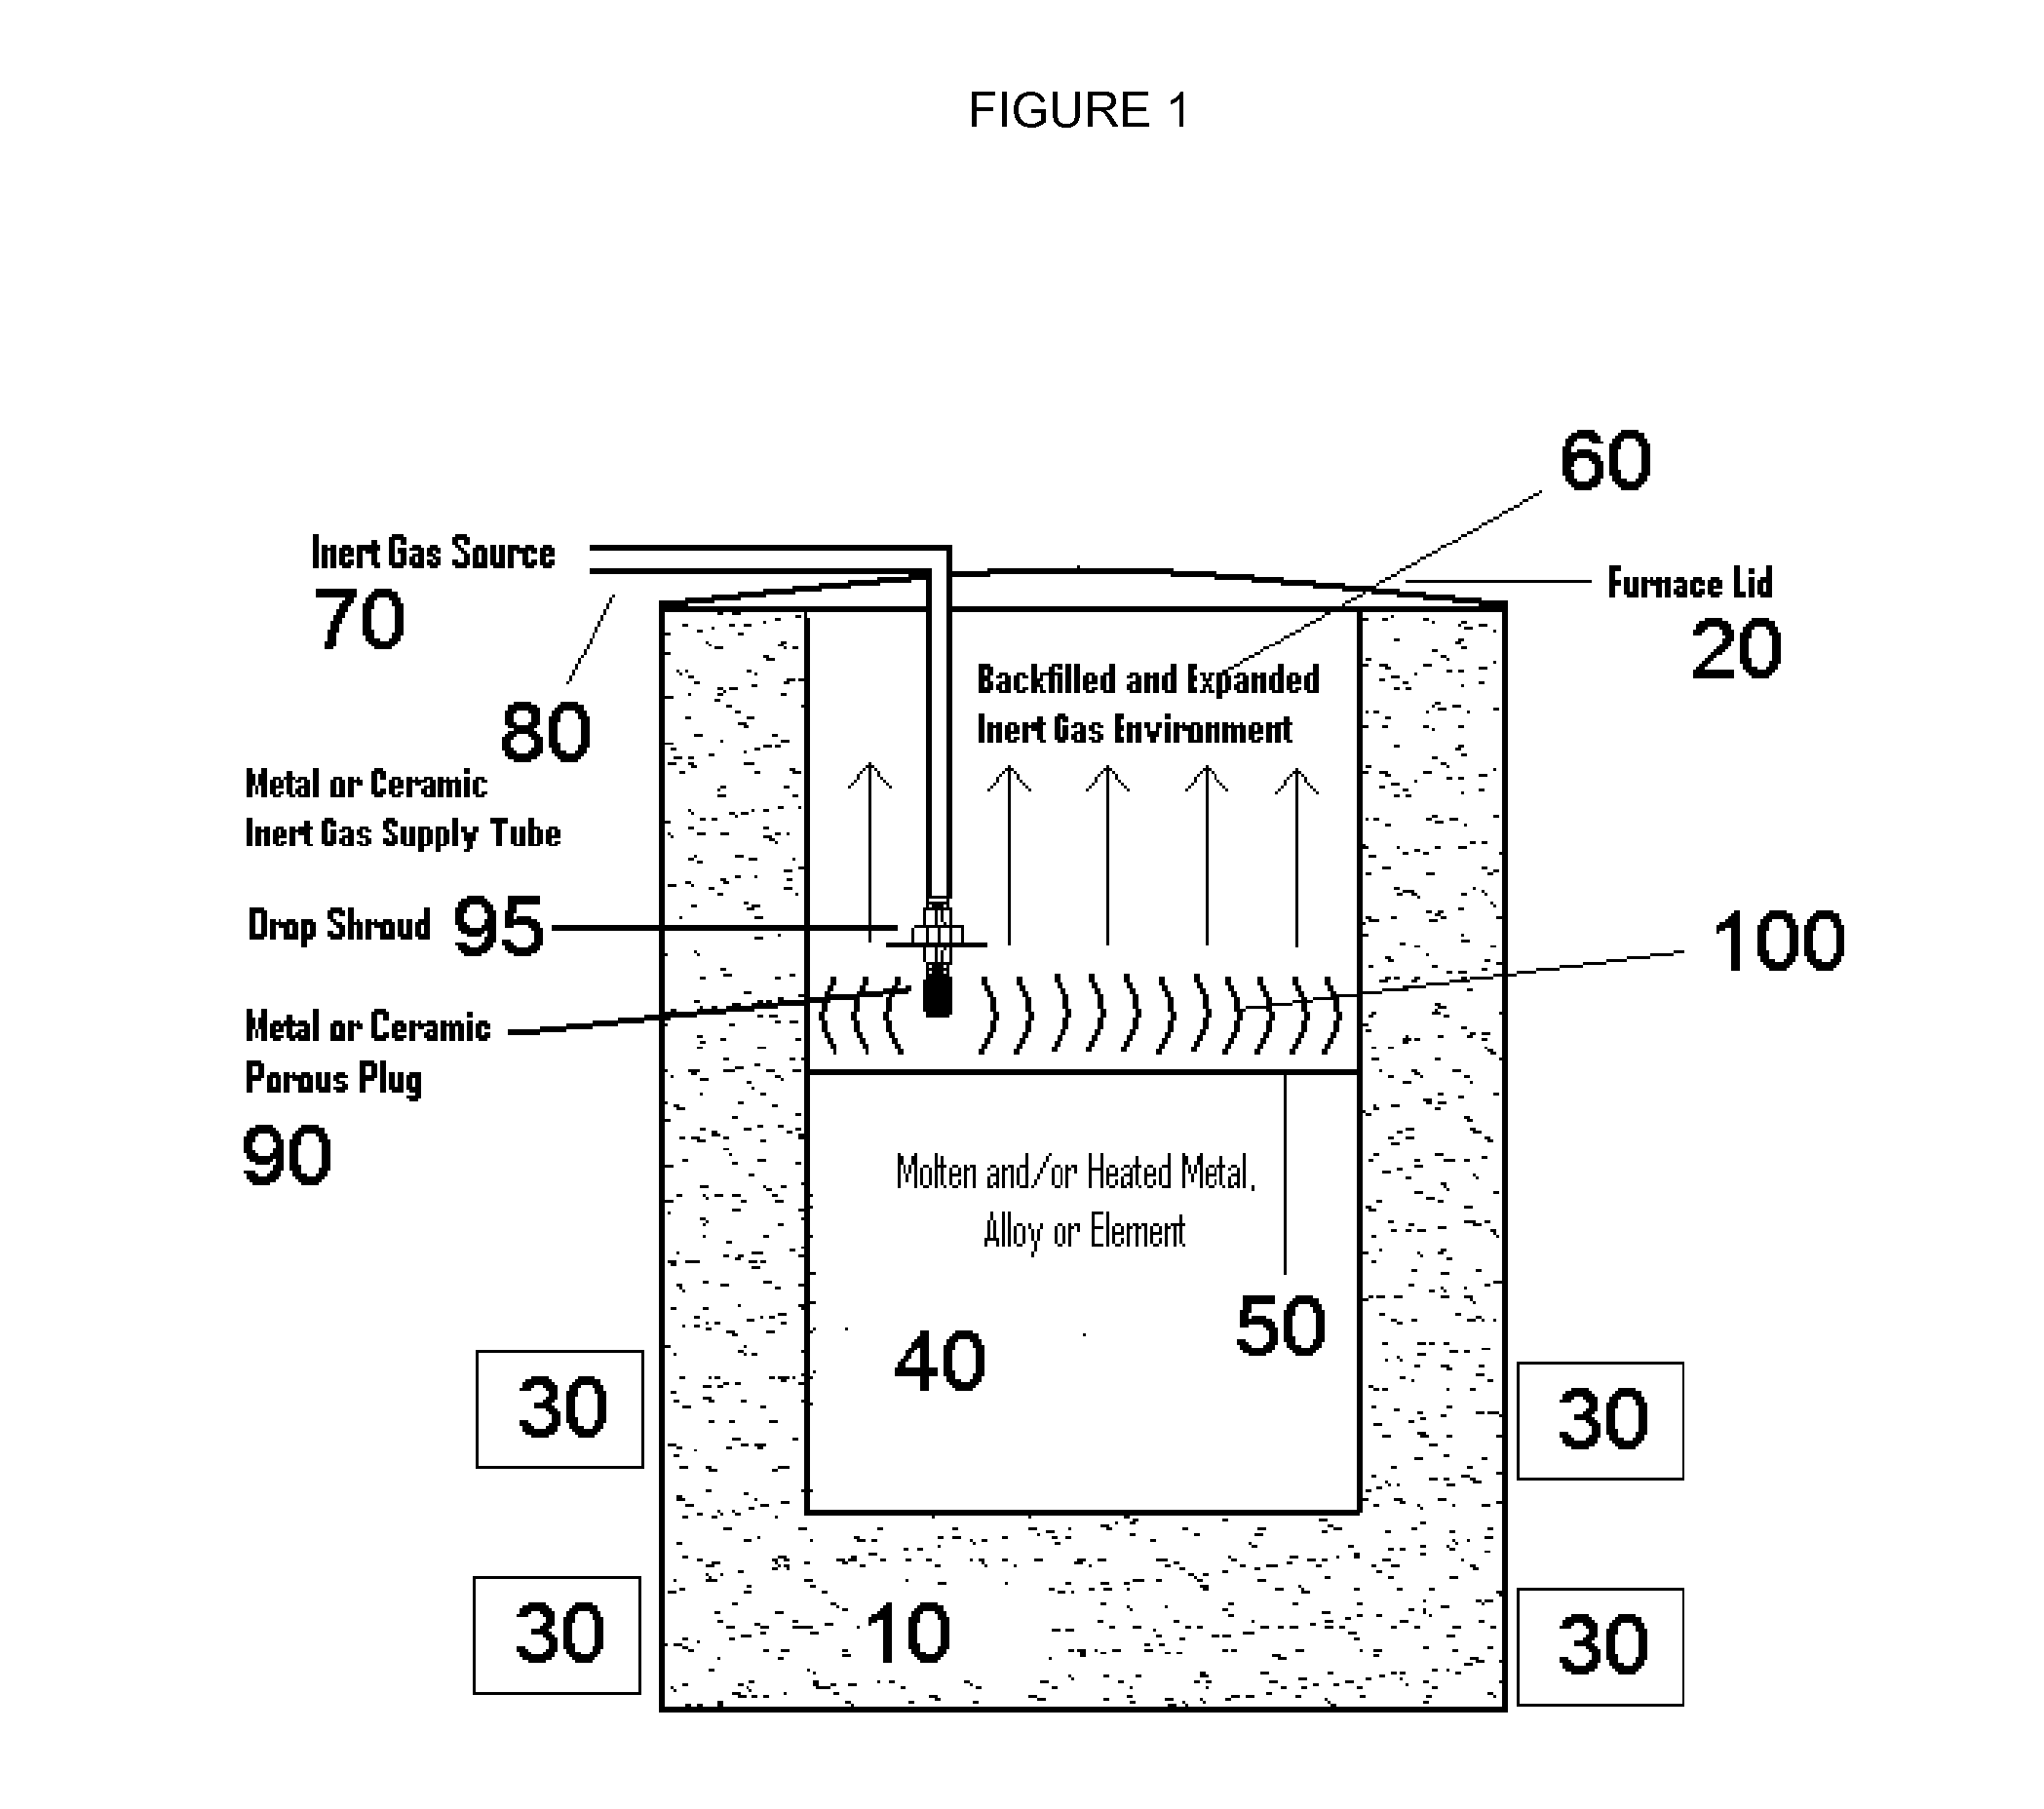 Apparatus and Method for Metal Surface Inertion by Backfilling